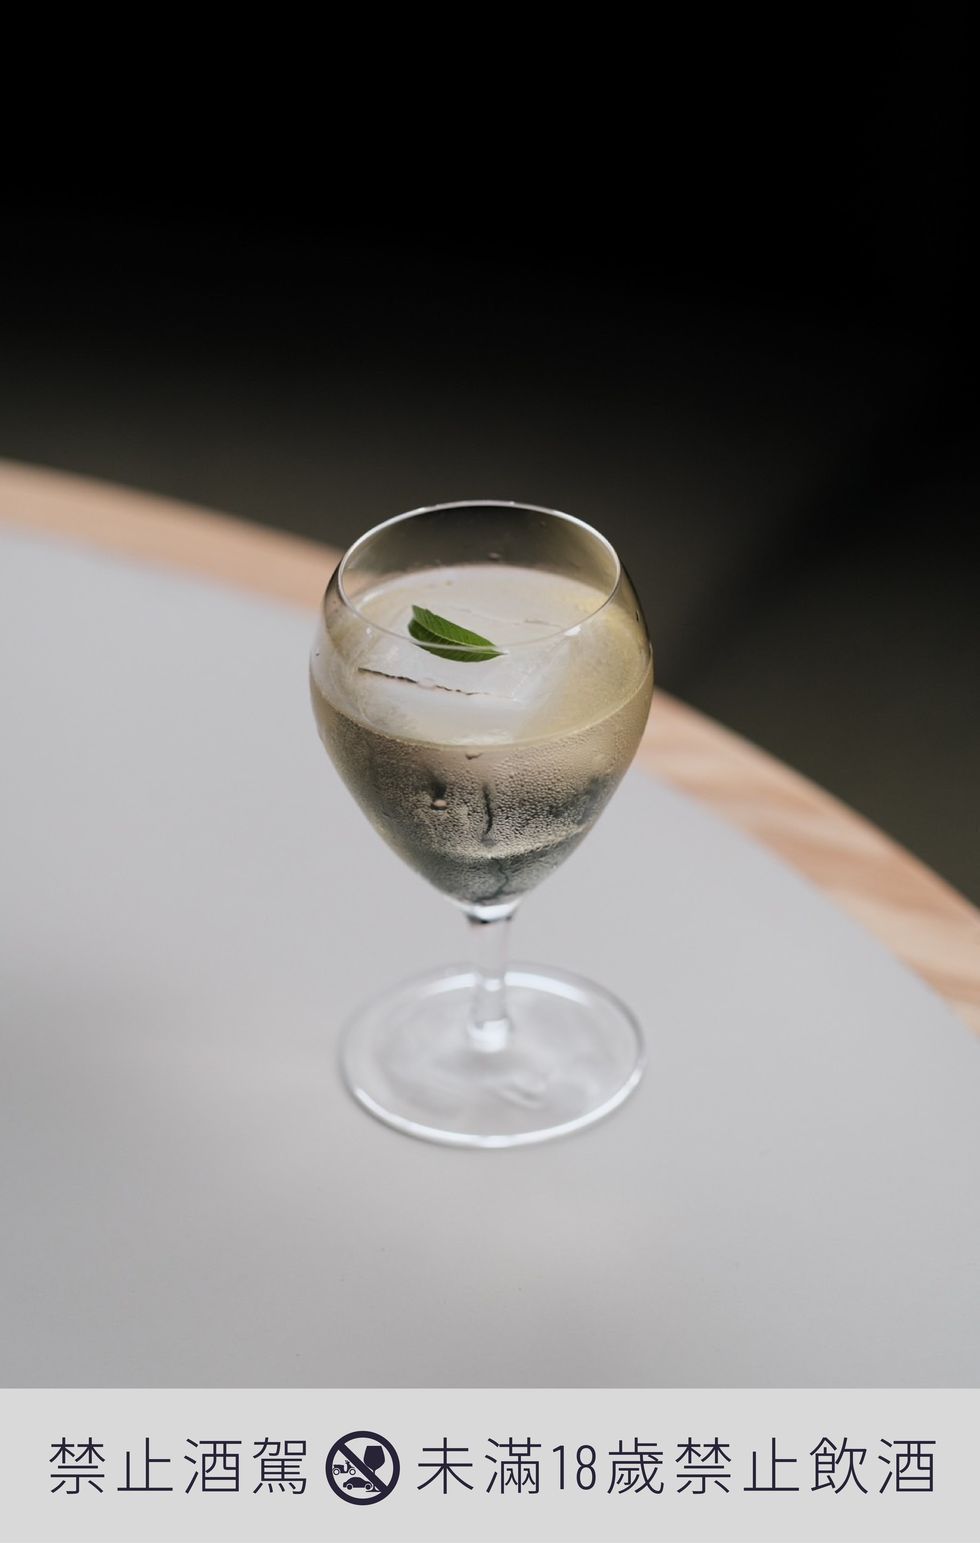 a glass with a green leaf on a white surface